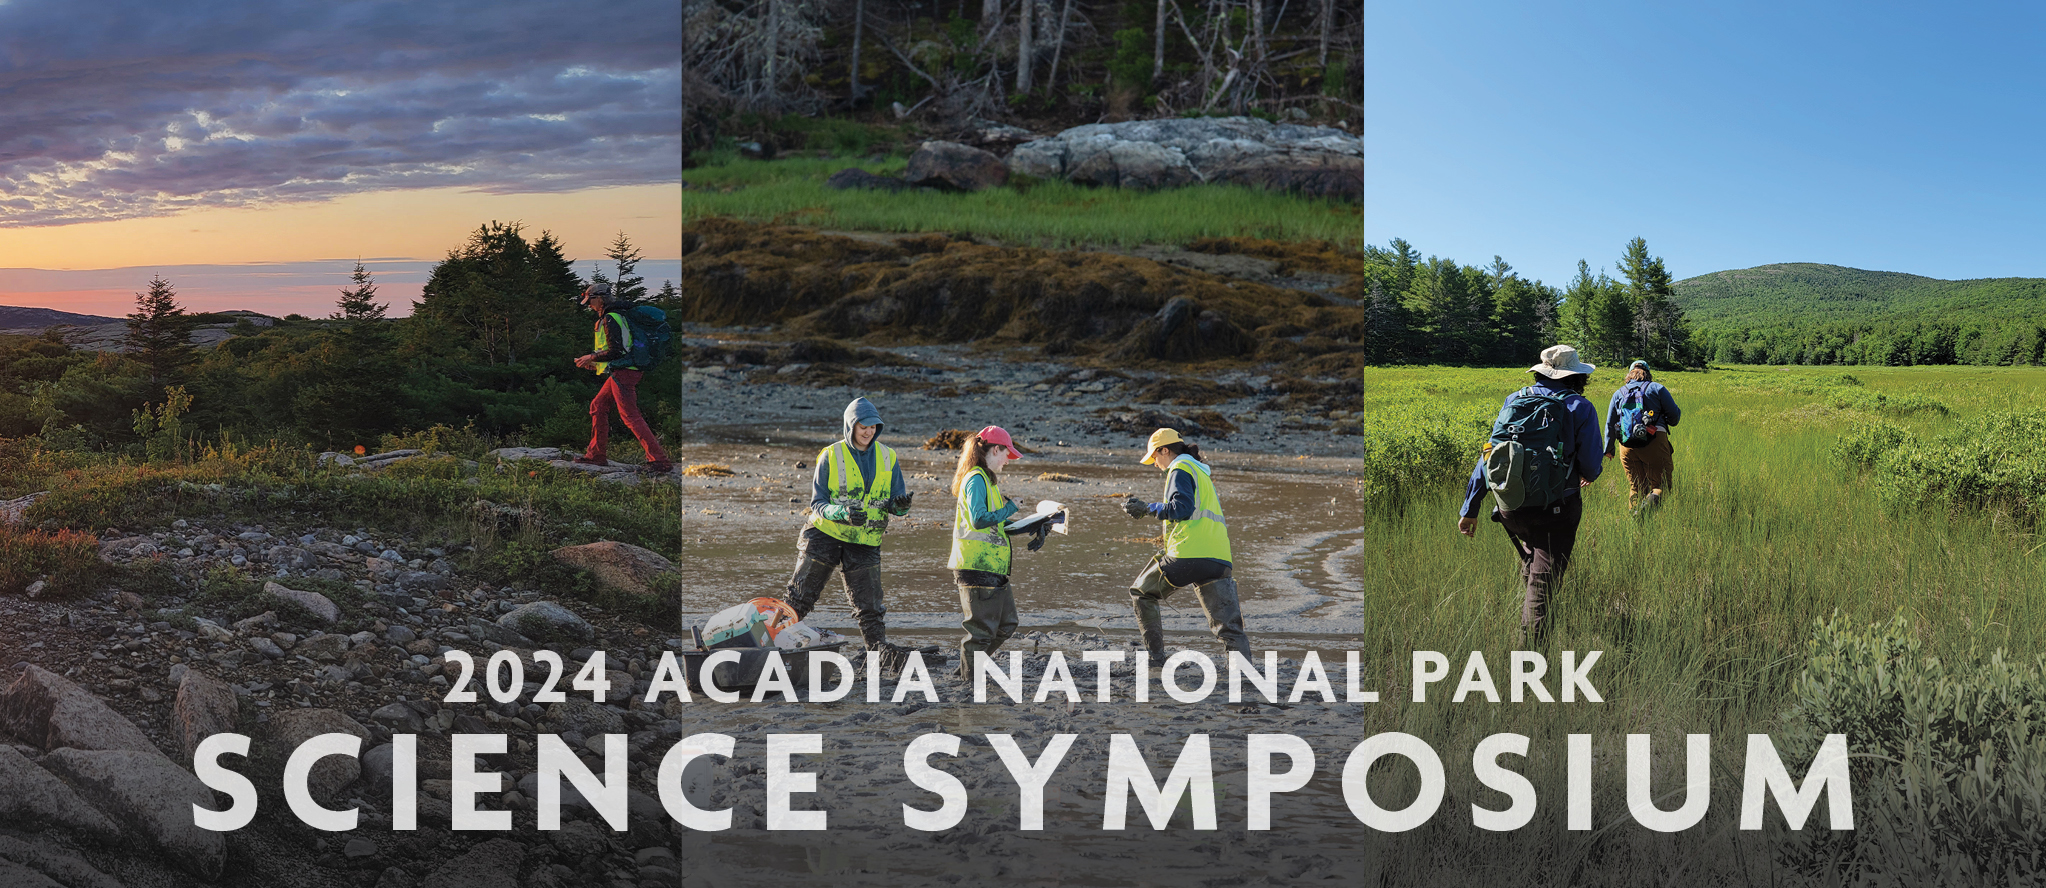 Three-image collage featuring (from left to right): A researcher hikes along a mountain trail in Acadia Nation Park at sunrise; Three ecology technicians measure and weigh seaweed at low tide; and two ecology technicians hike through a meadow wetland on a bright, blue-sky day. Overlaid is text that reads: 2024 Acadia National Park Science Symposium.